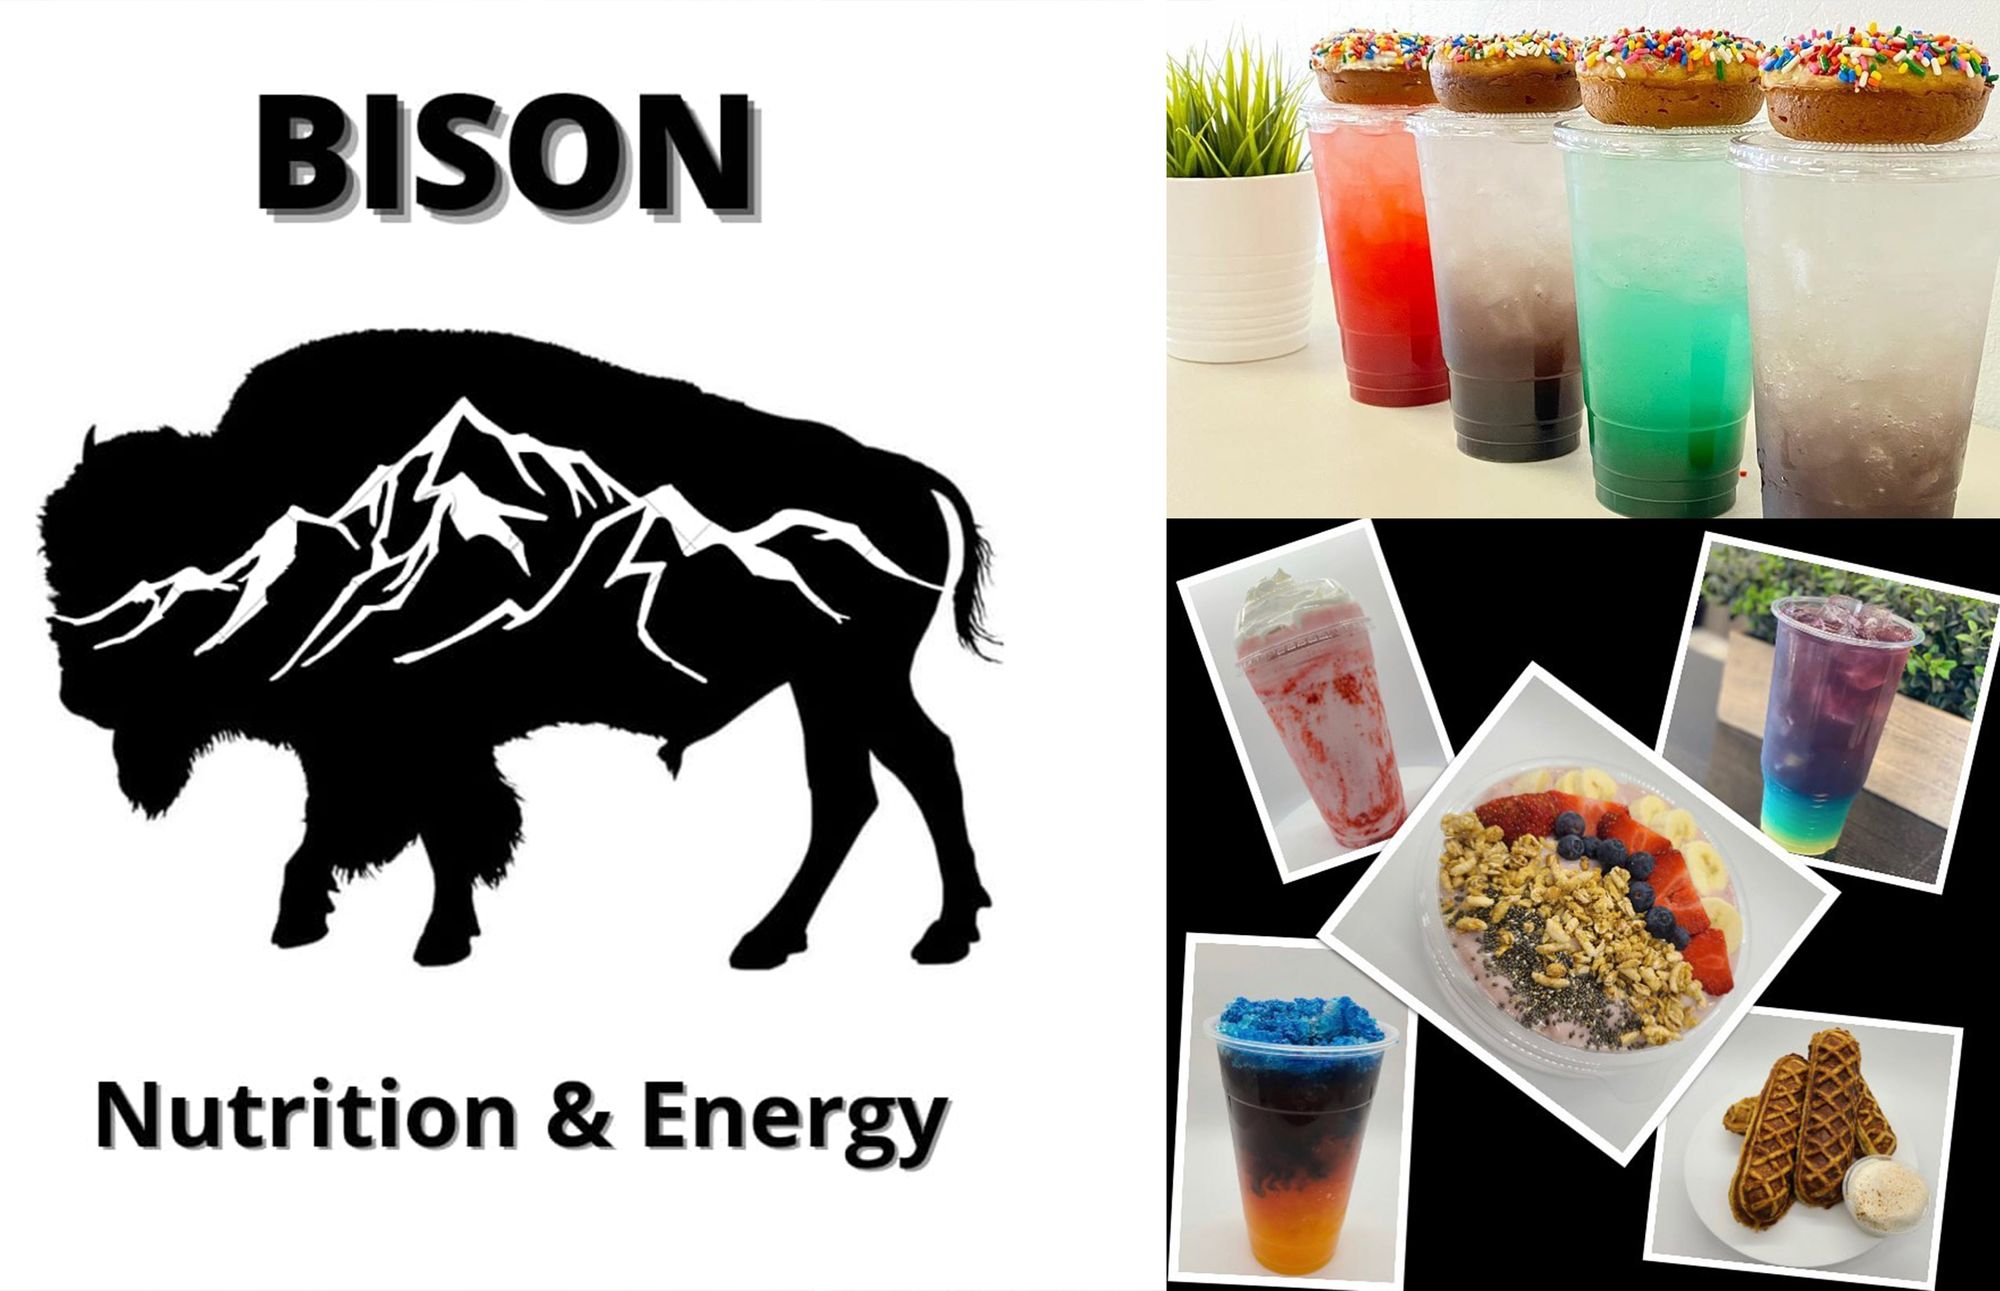 Don't Miss The Grand Opening Of Bison Nutrition In Cheyenne